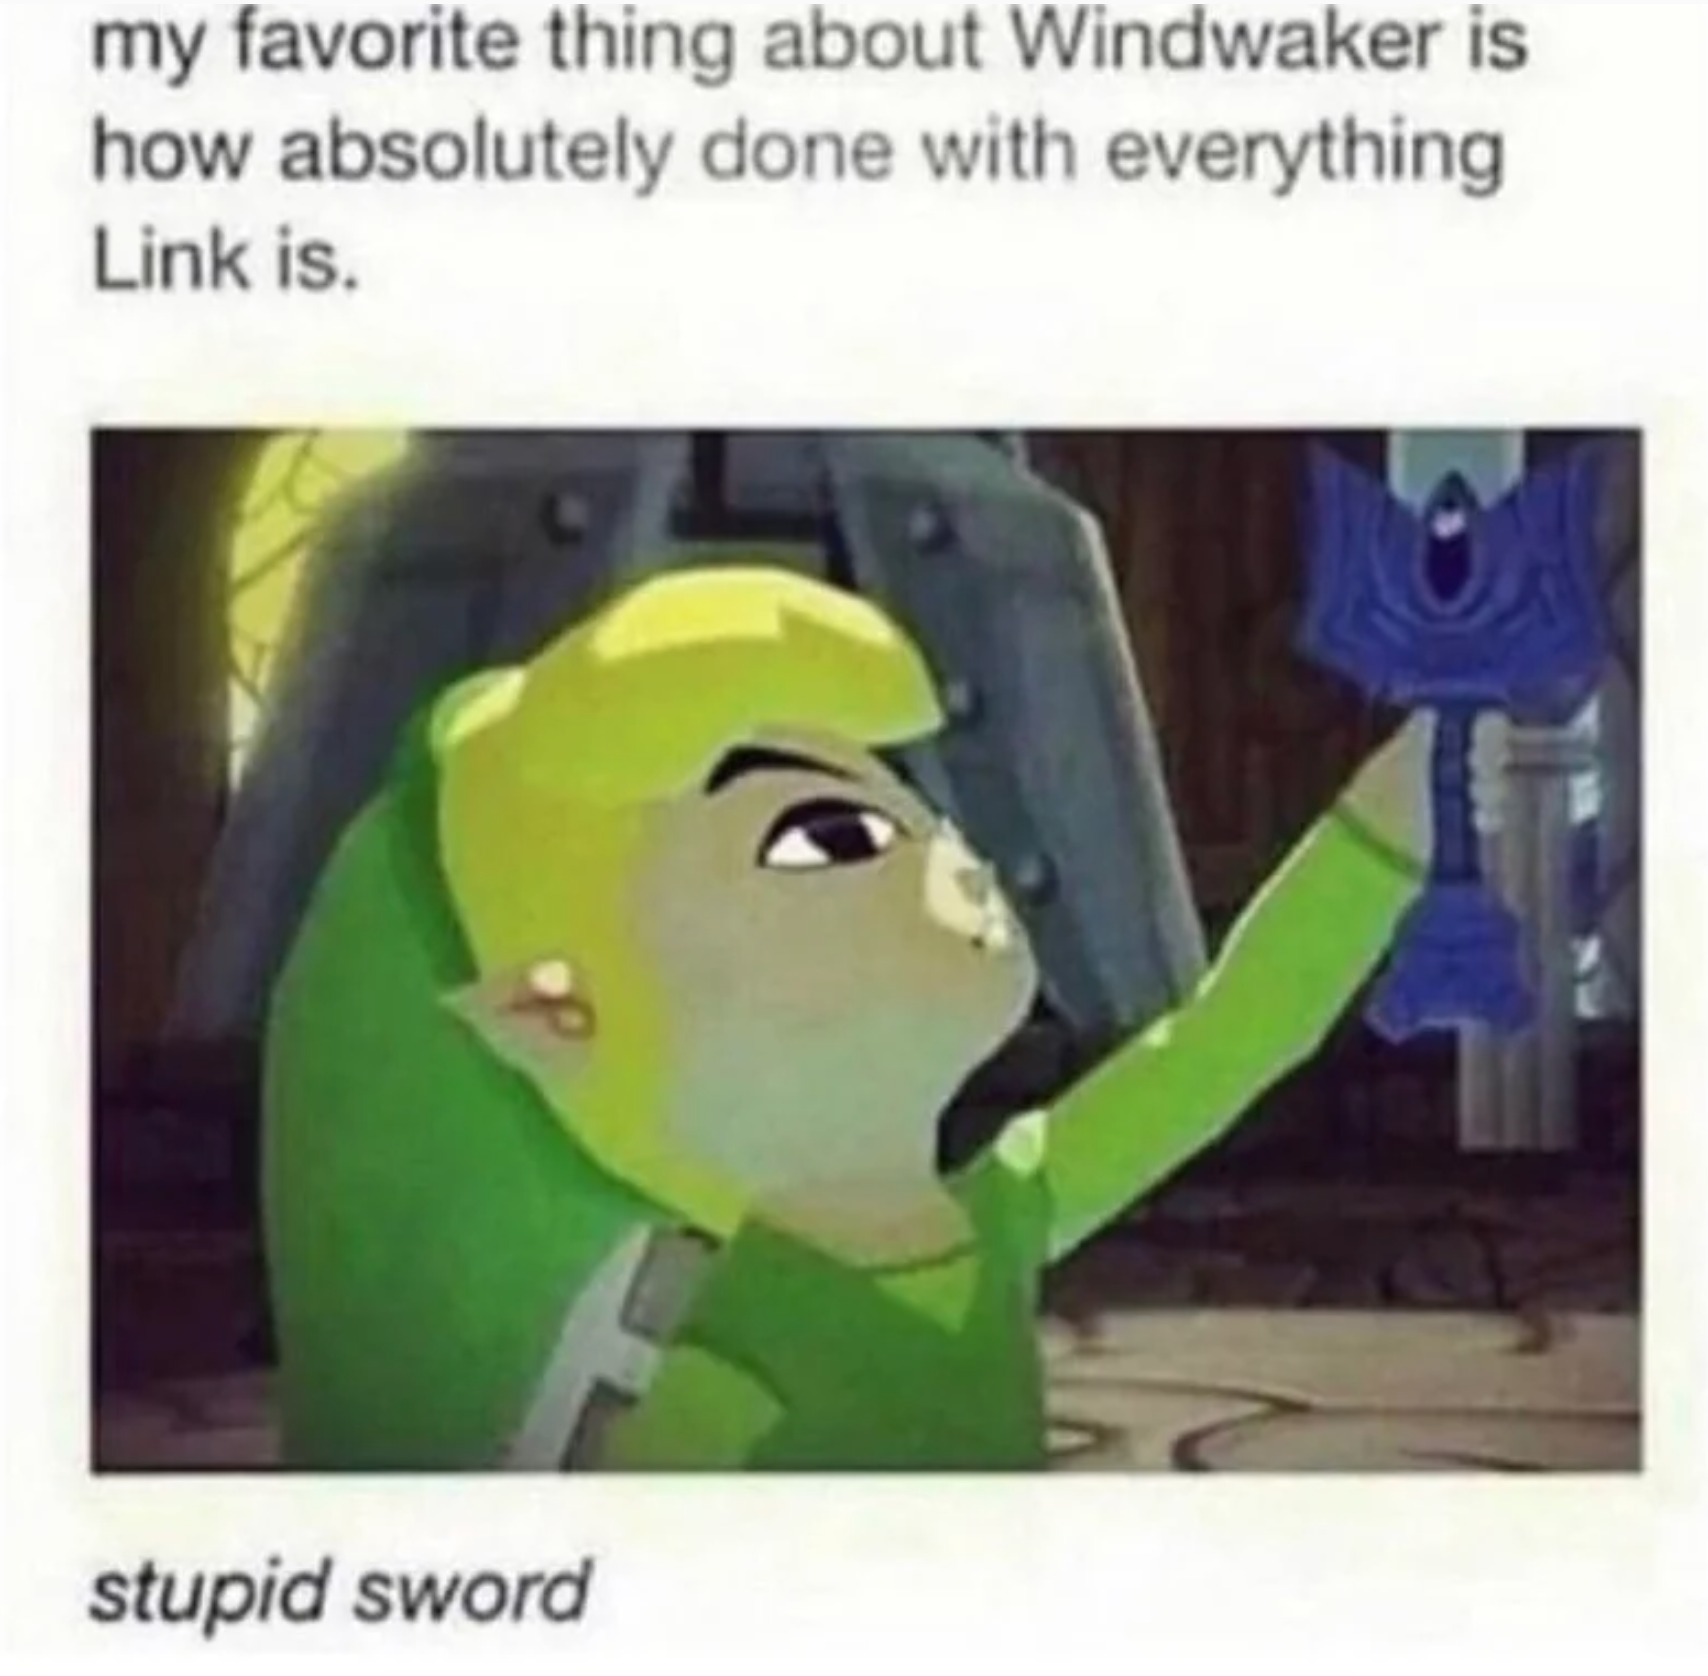 funny gaming memes - zelda memes - my favorite thing about Windwaker is how absolutely done with everything Link is. stupid sword